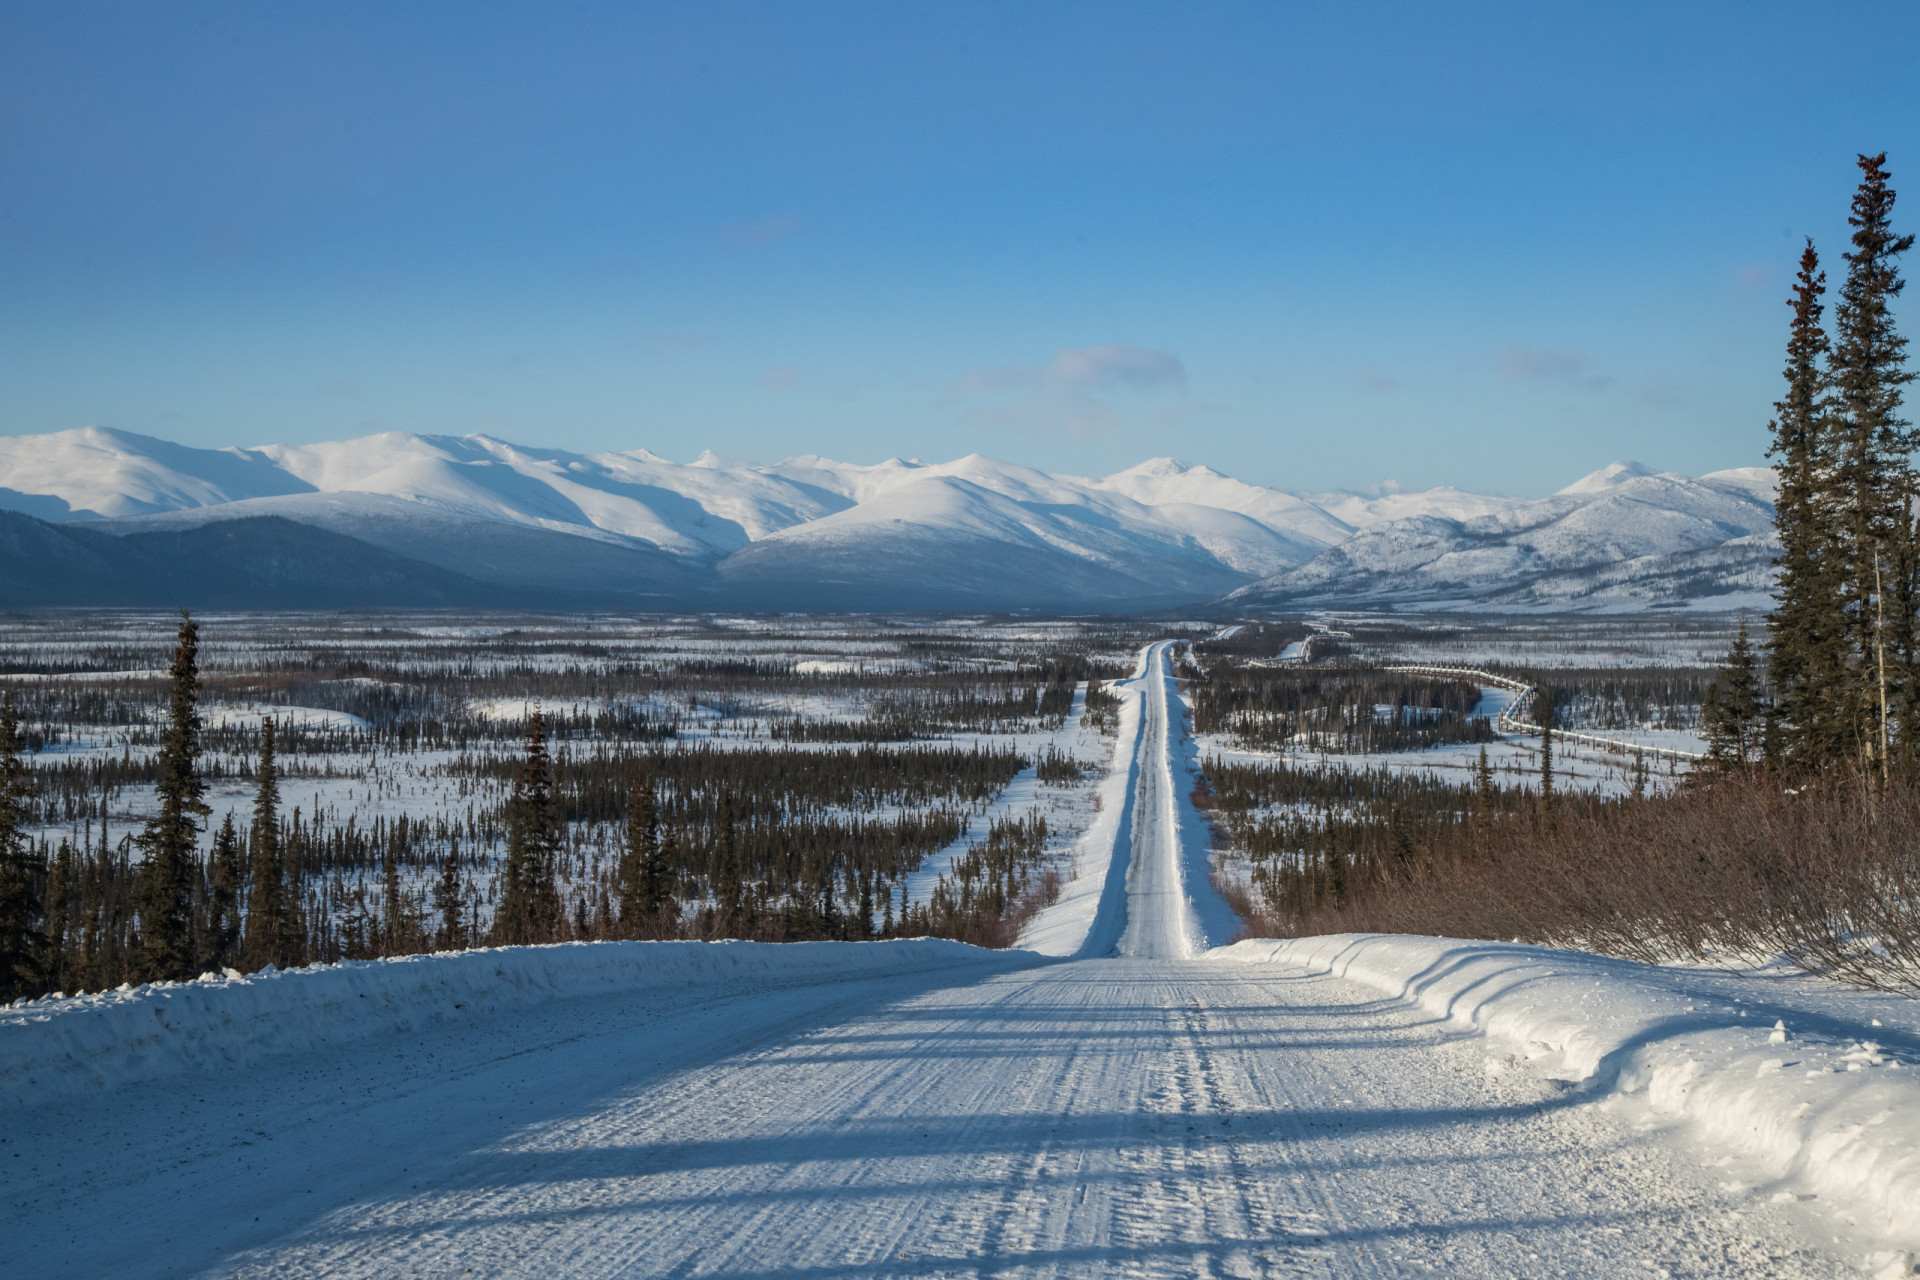 <p>One of the most isolated roads in the US is the Dalton Highway in Alaska. Signed as Alaska Route 11, this is a 414-mile (666-km) road that connects Fairbanks with Deadhorse near the Arctic Ocean.</p><p><a href="https://www.msn.com/en-us/community/channel/vid-7xx8mnucu55yw63we9va2gwr7uihbxwc68fxqp25x6tg4ftibpra?cvid=94631541bc0f4f89bfd59158d696ad7e">Follow us and access great exclusive content every day</a></p>